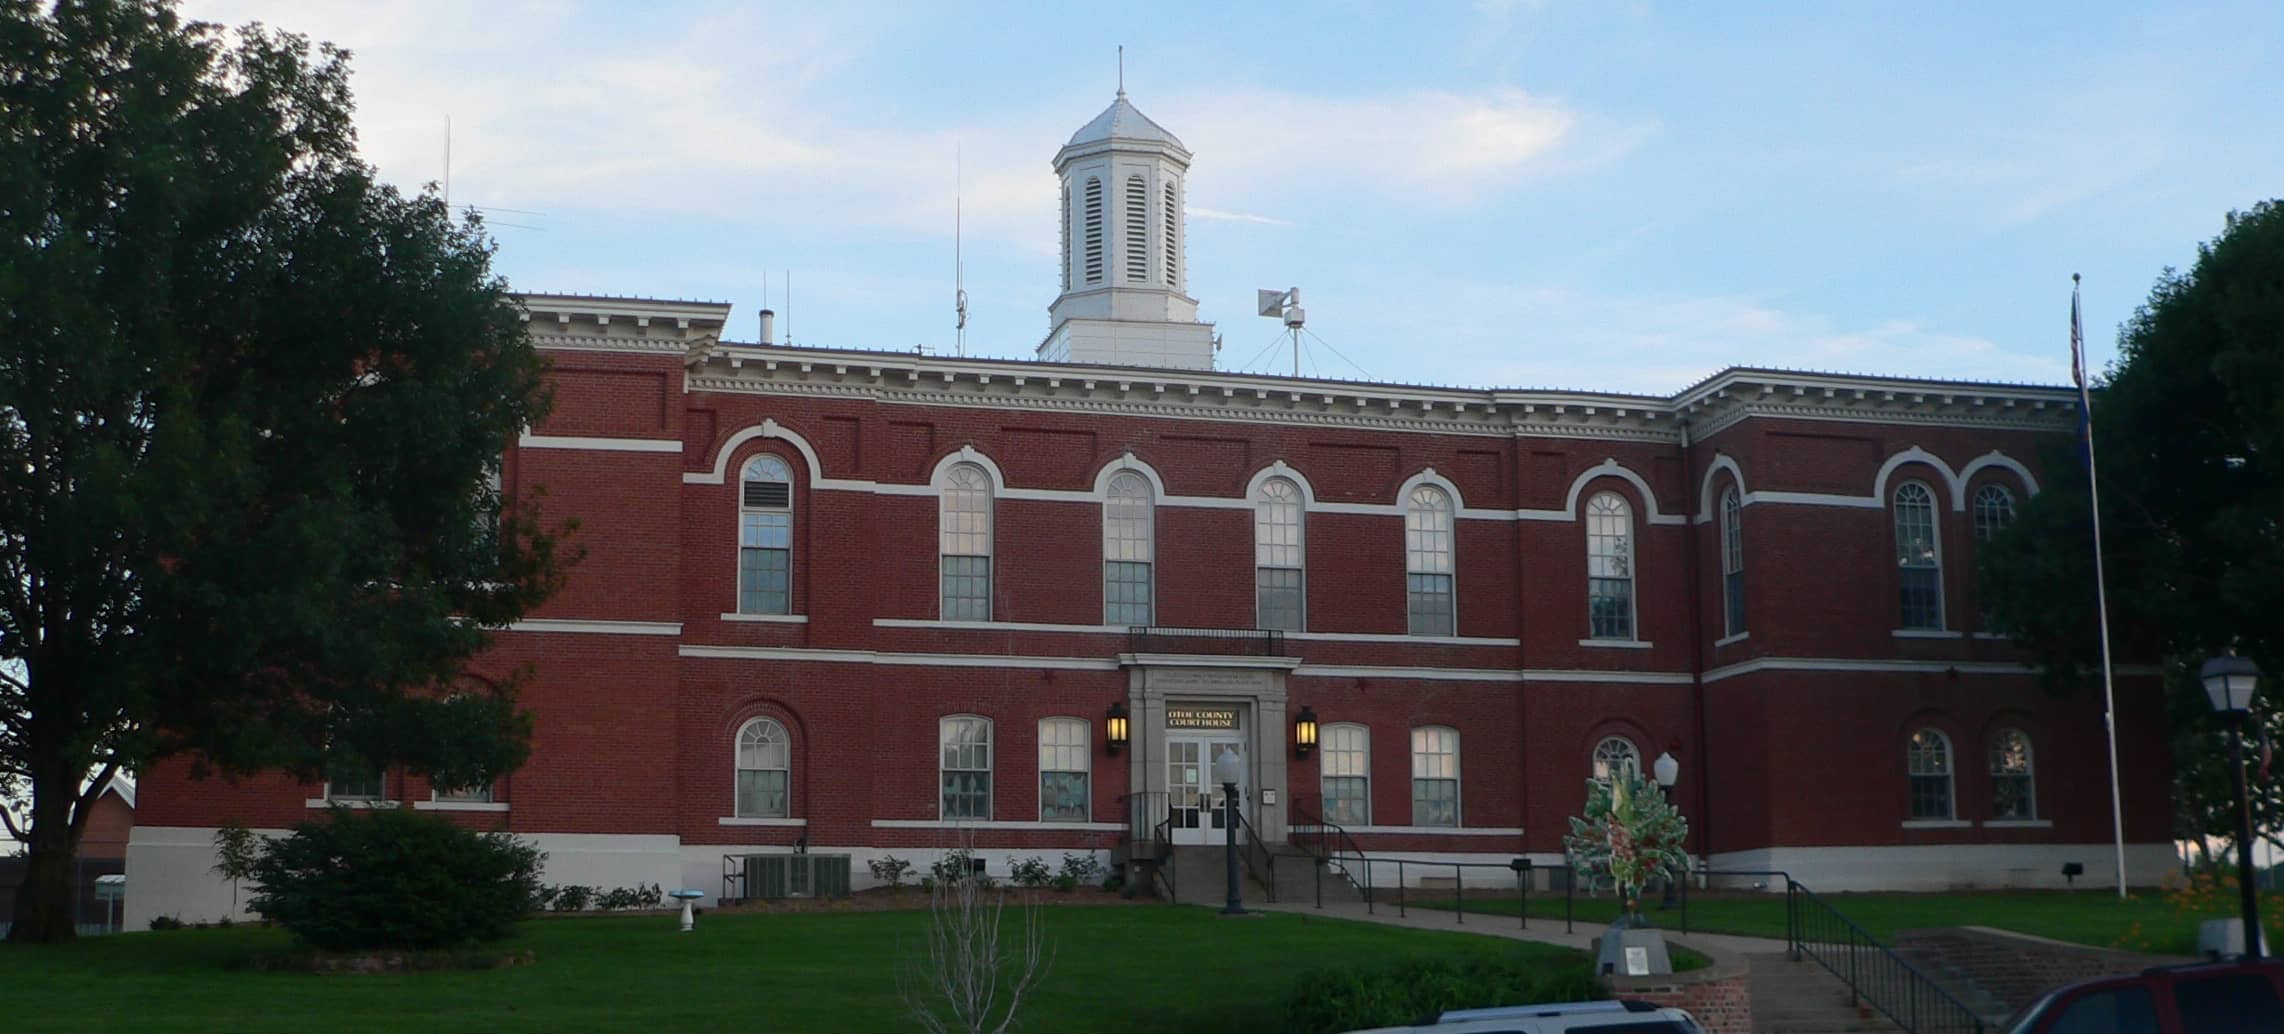 Image of Otoe County District Court